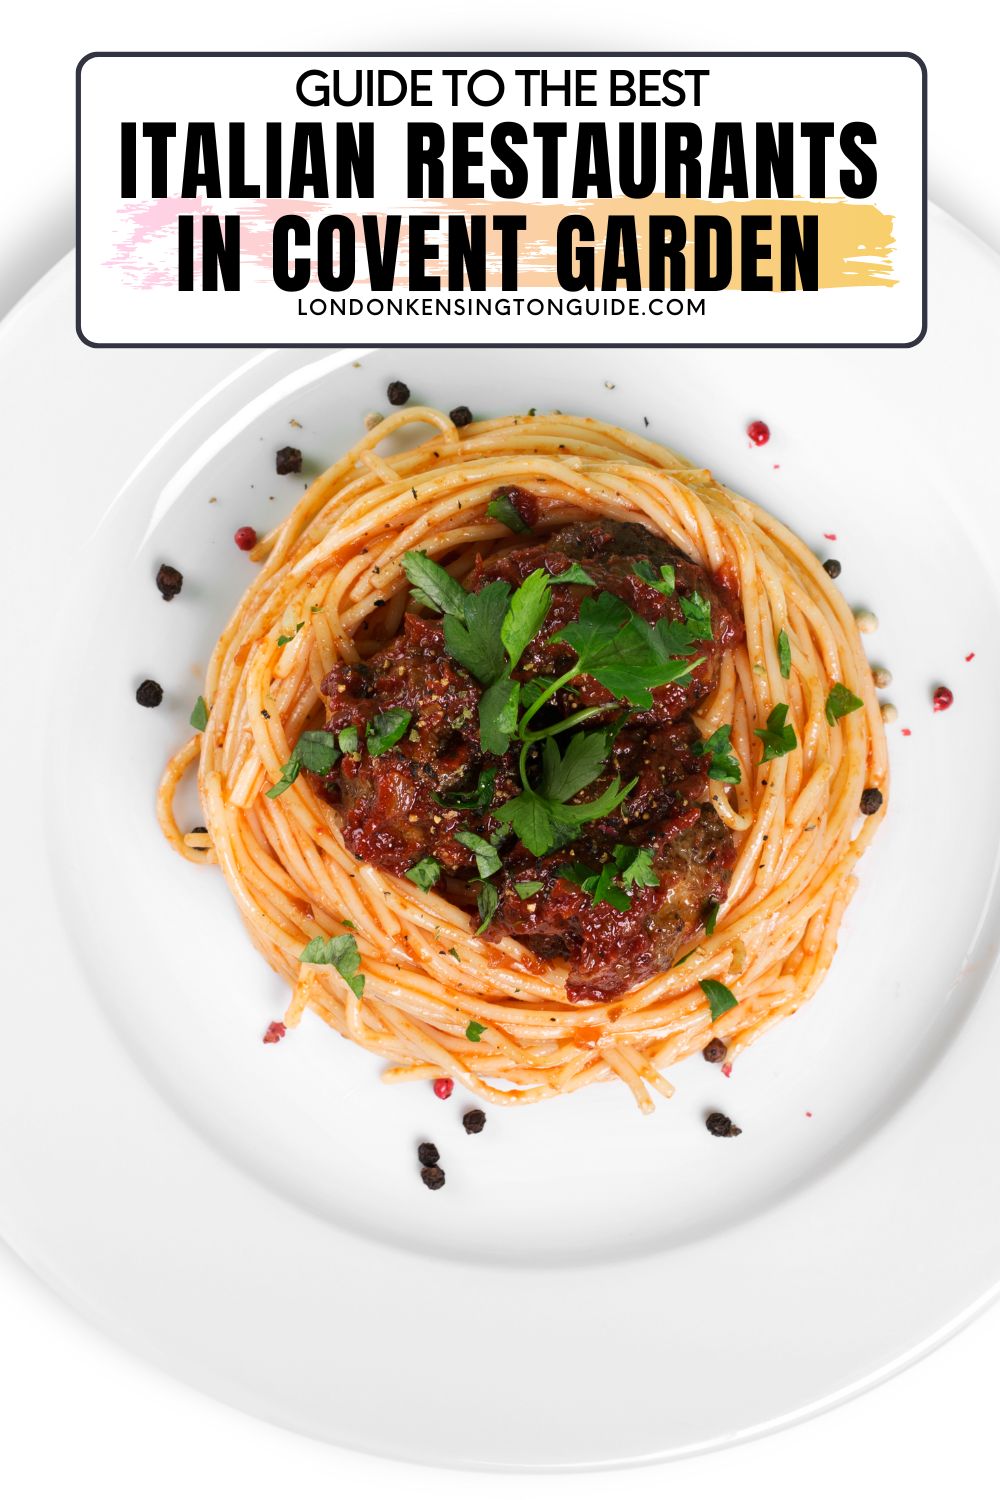 Guide to the best Italian restaurants in Covent Garden. Whether you are looking for a pasta place, Pizzeria or just want food Italian food. We have you covered! italian restaurants in covent garden | italian covent garden | pasta brown Covent Garden | listeria pizzeria Covent Garden | pasta Covent Garden | italian restaurants near Covent Garden | best italian Covent Garden | best Italian restaurants Covent Garden | italian near Covent Garden | italian food Covent Garden | 